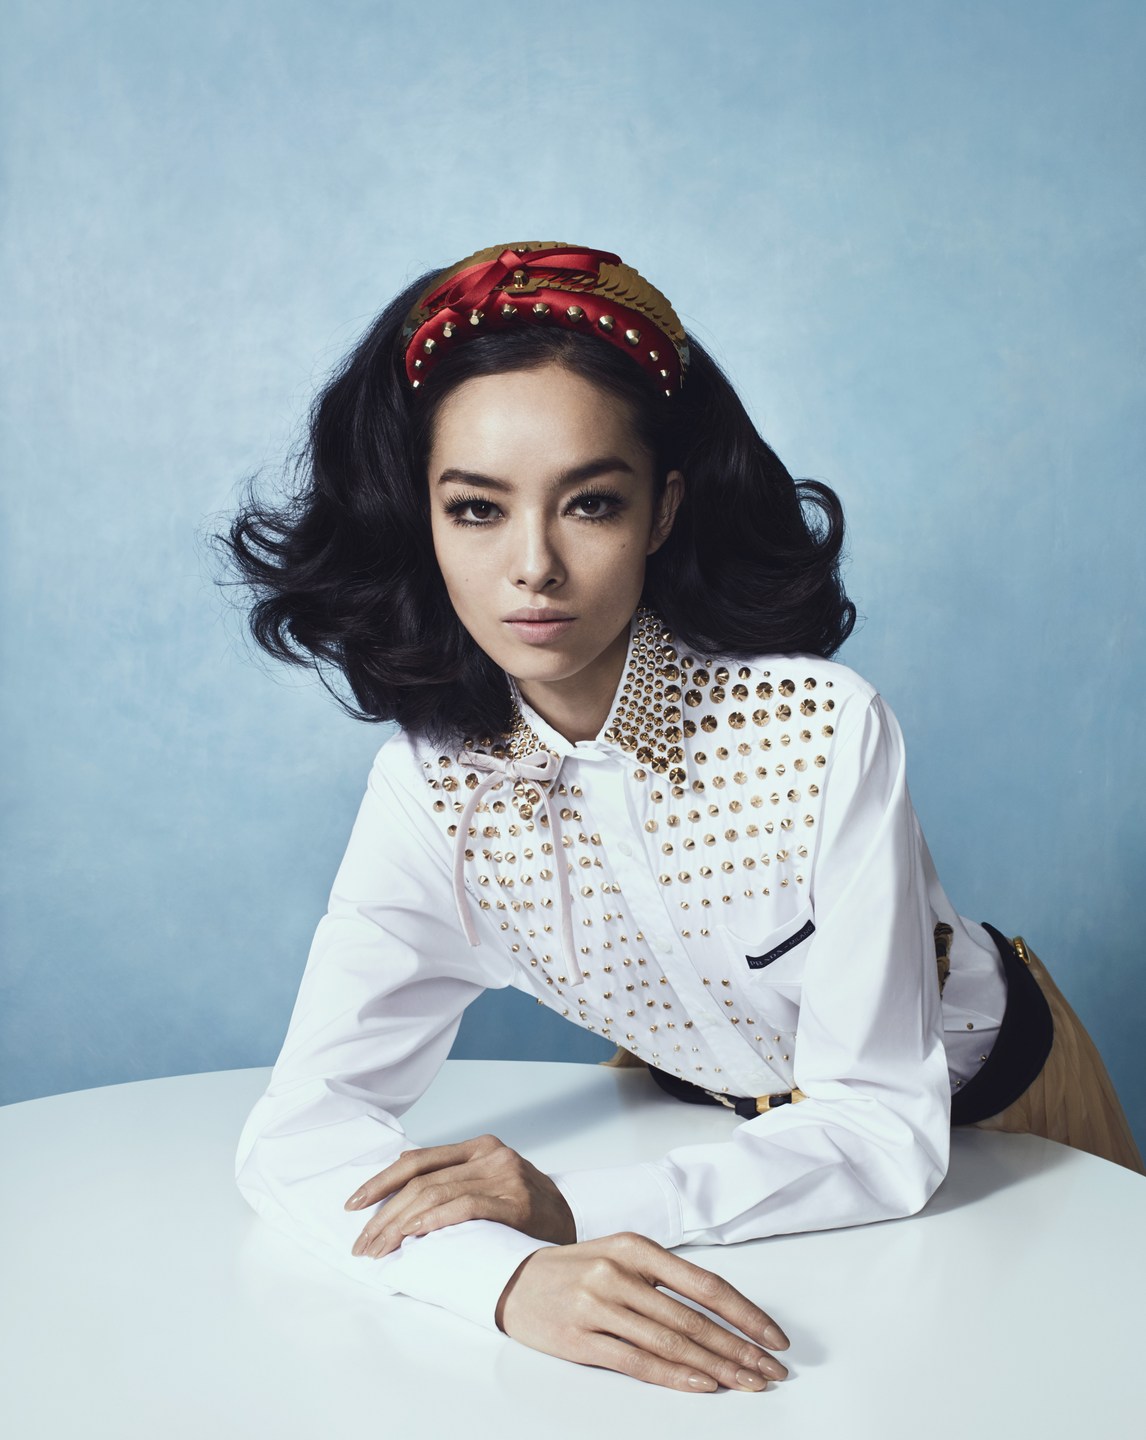 Fei Fei Sun in Vogue China April 2019 by Emma Summerton